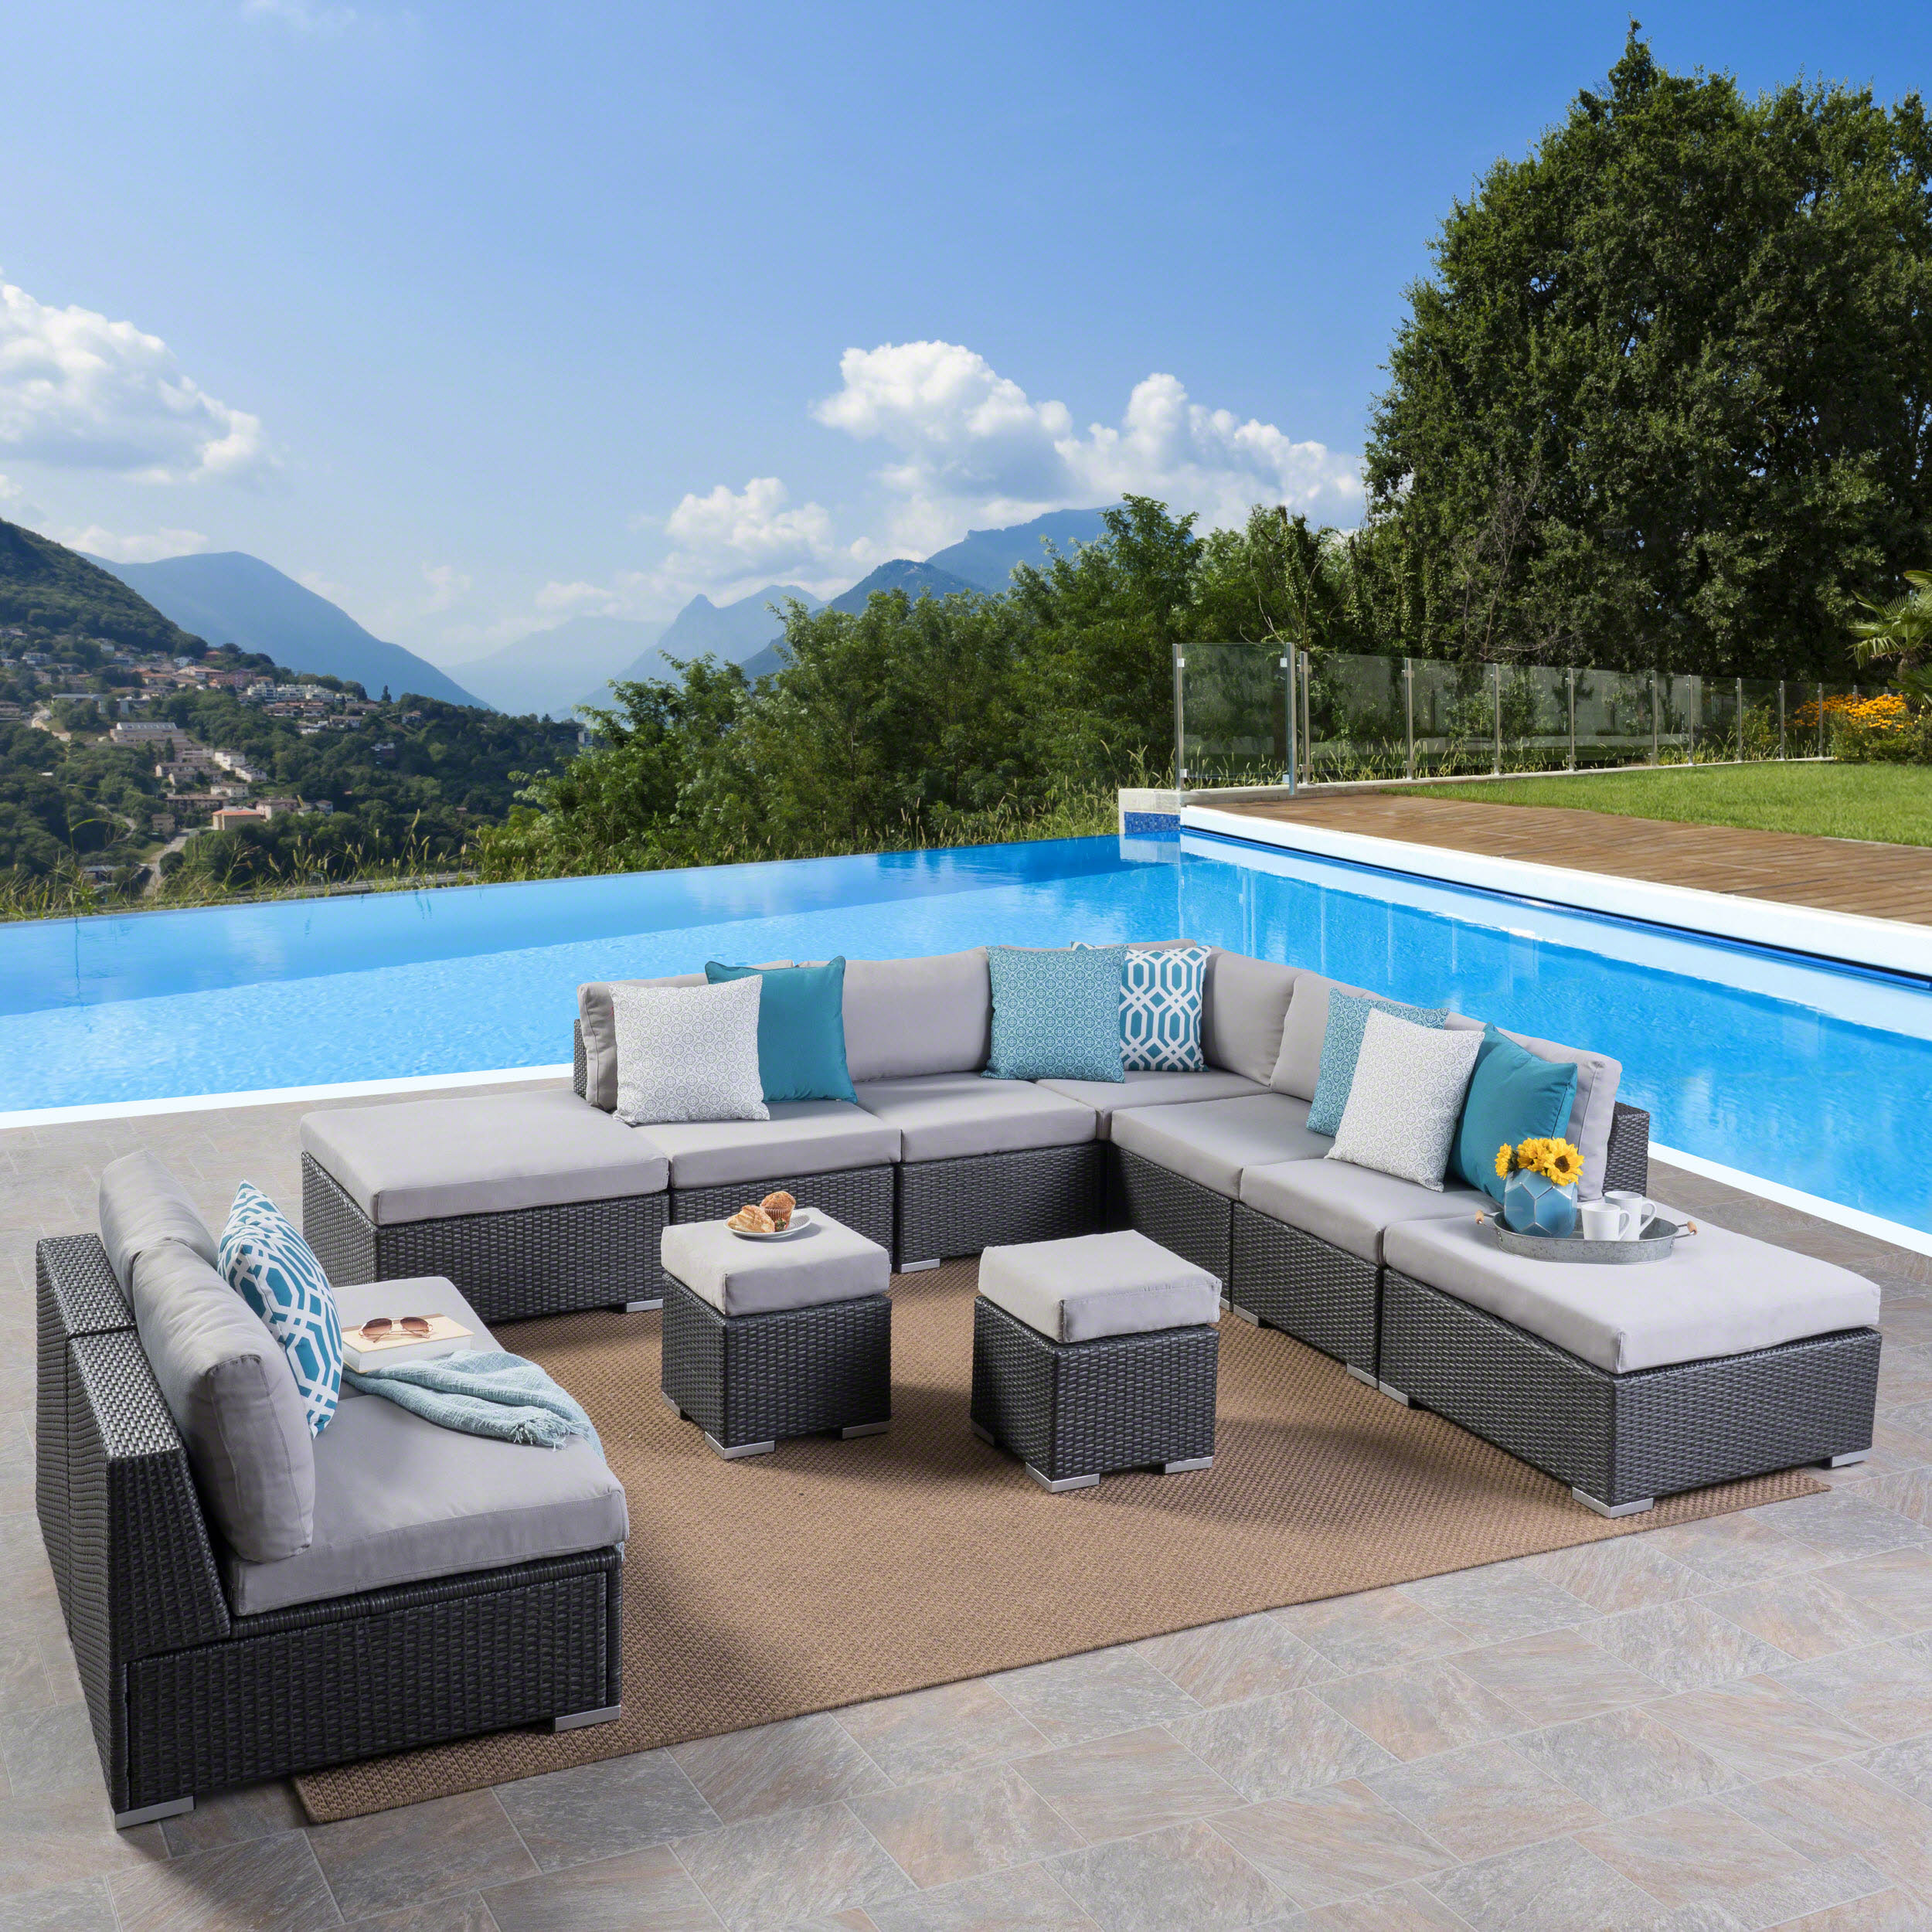 Faviola Outdoor 10 Piece Wicker Sectional Set with Ottomans, Grey, Silver - image 1 of 6